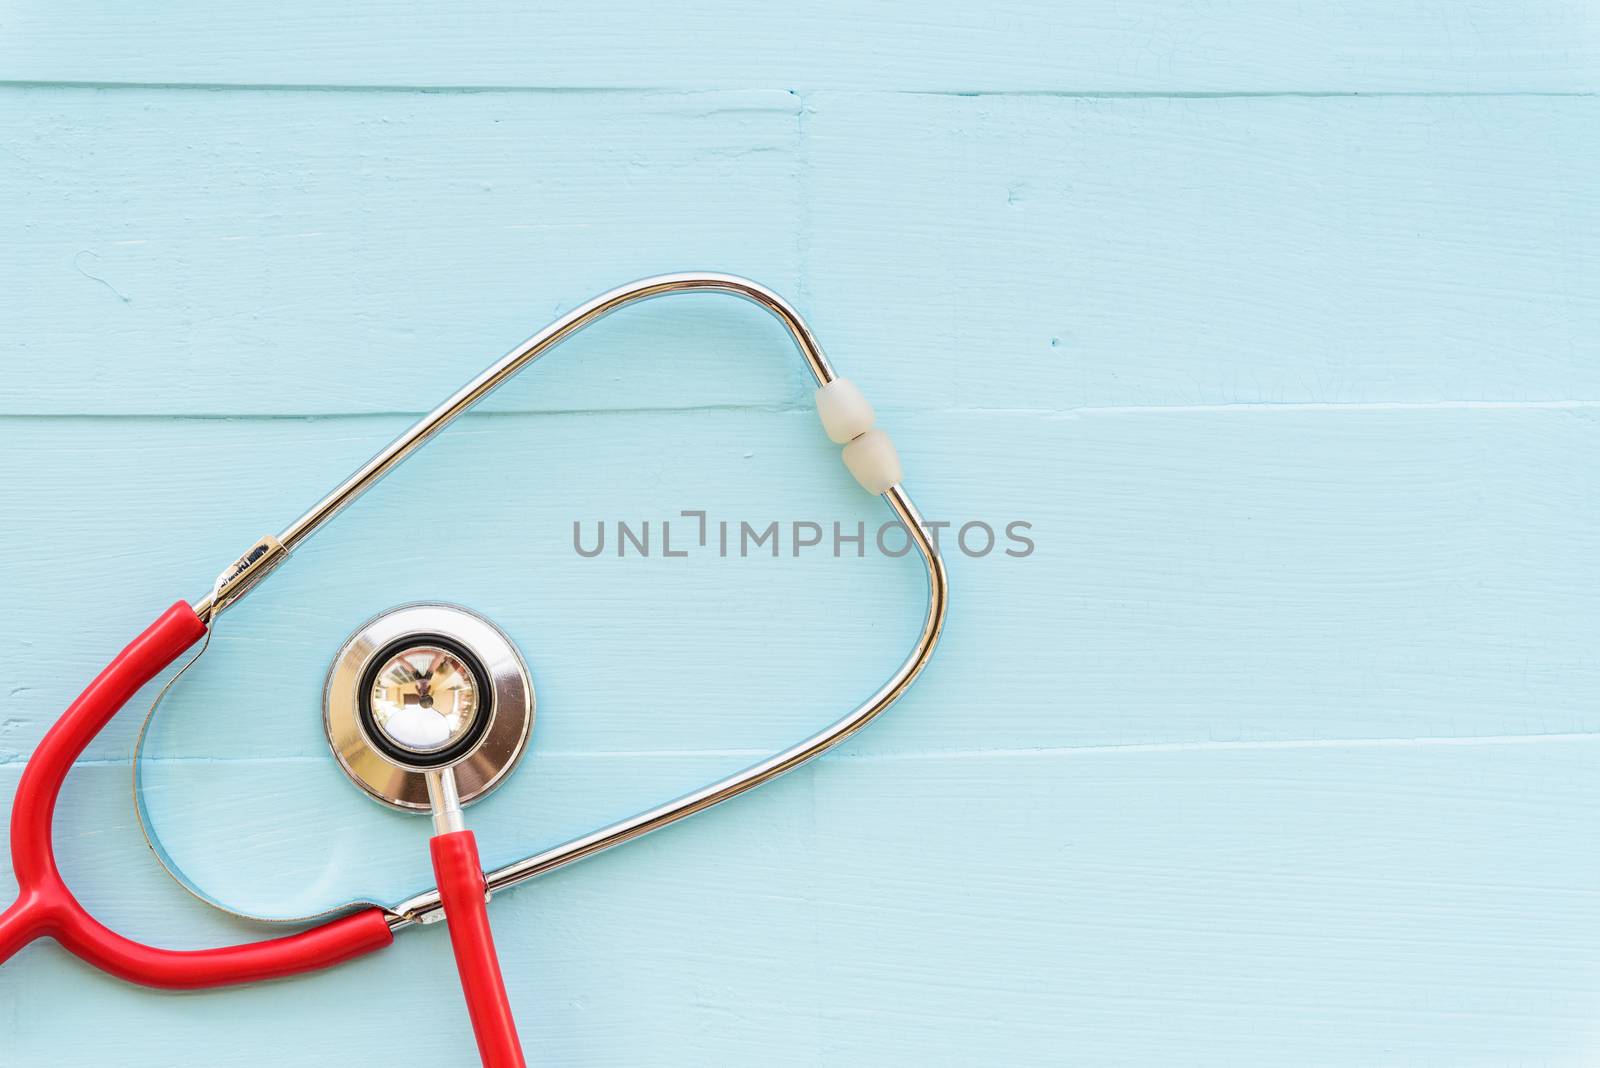 World health day, Healthcare and medical concept. Red heart with Stethoscope, notepad or notebook, thermometer and yellow Pill on Pastel white and blue wooden table background texture.